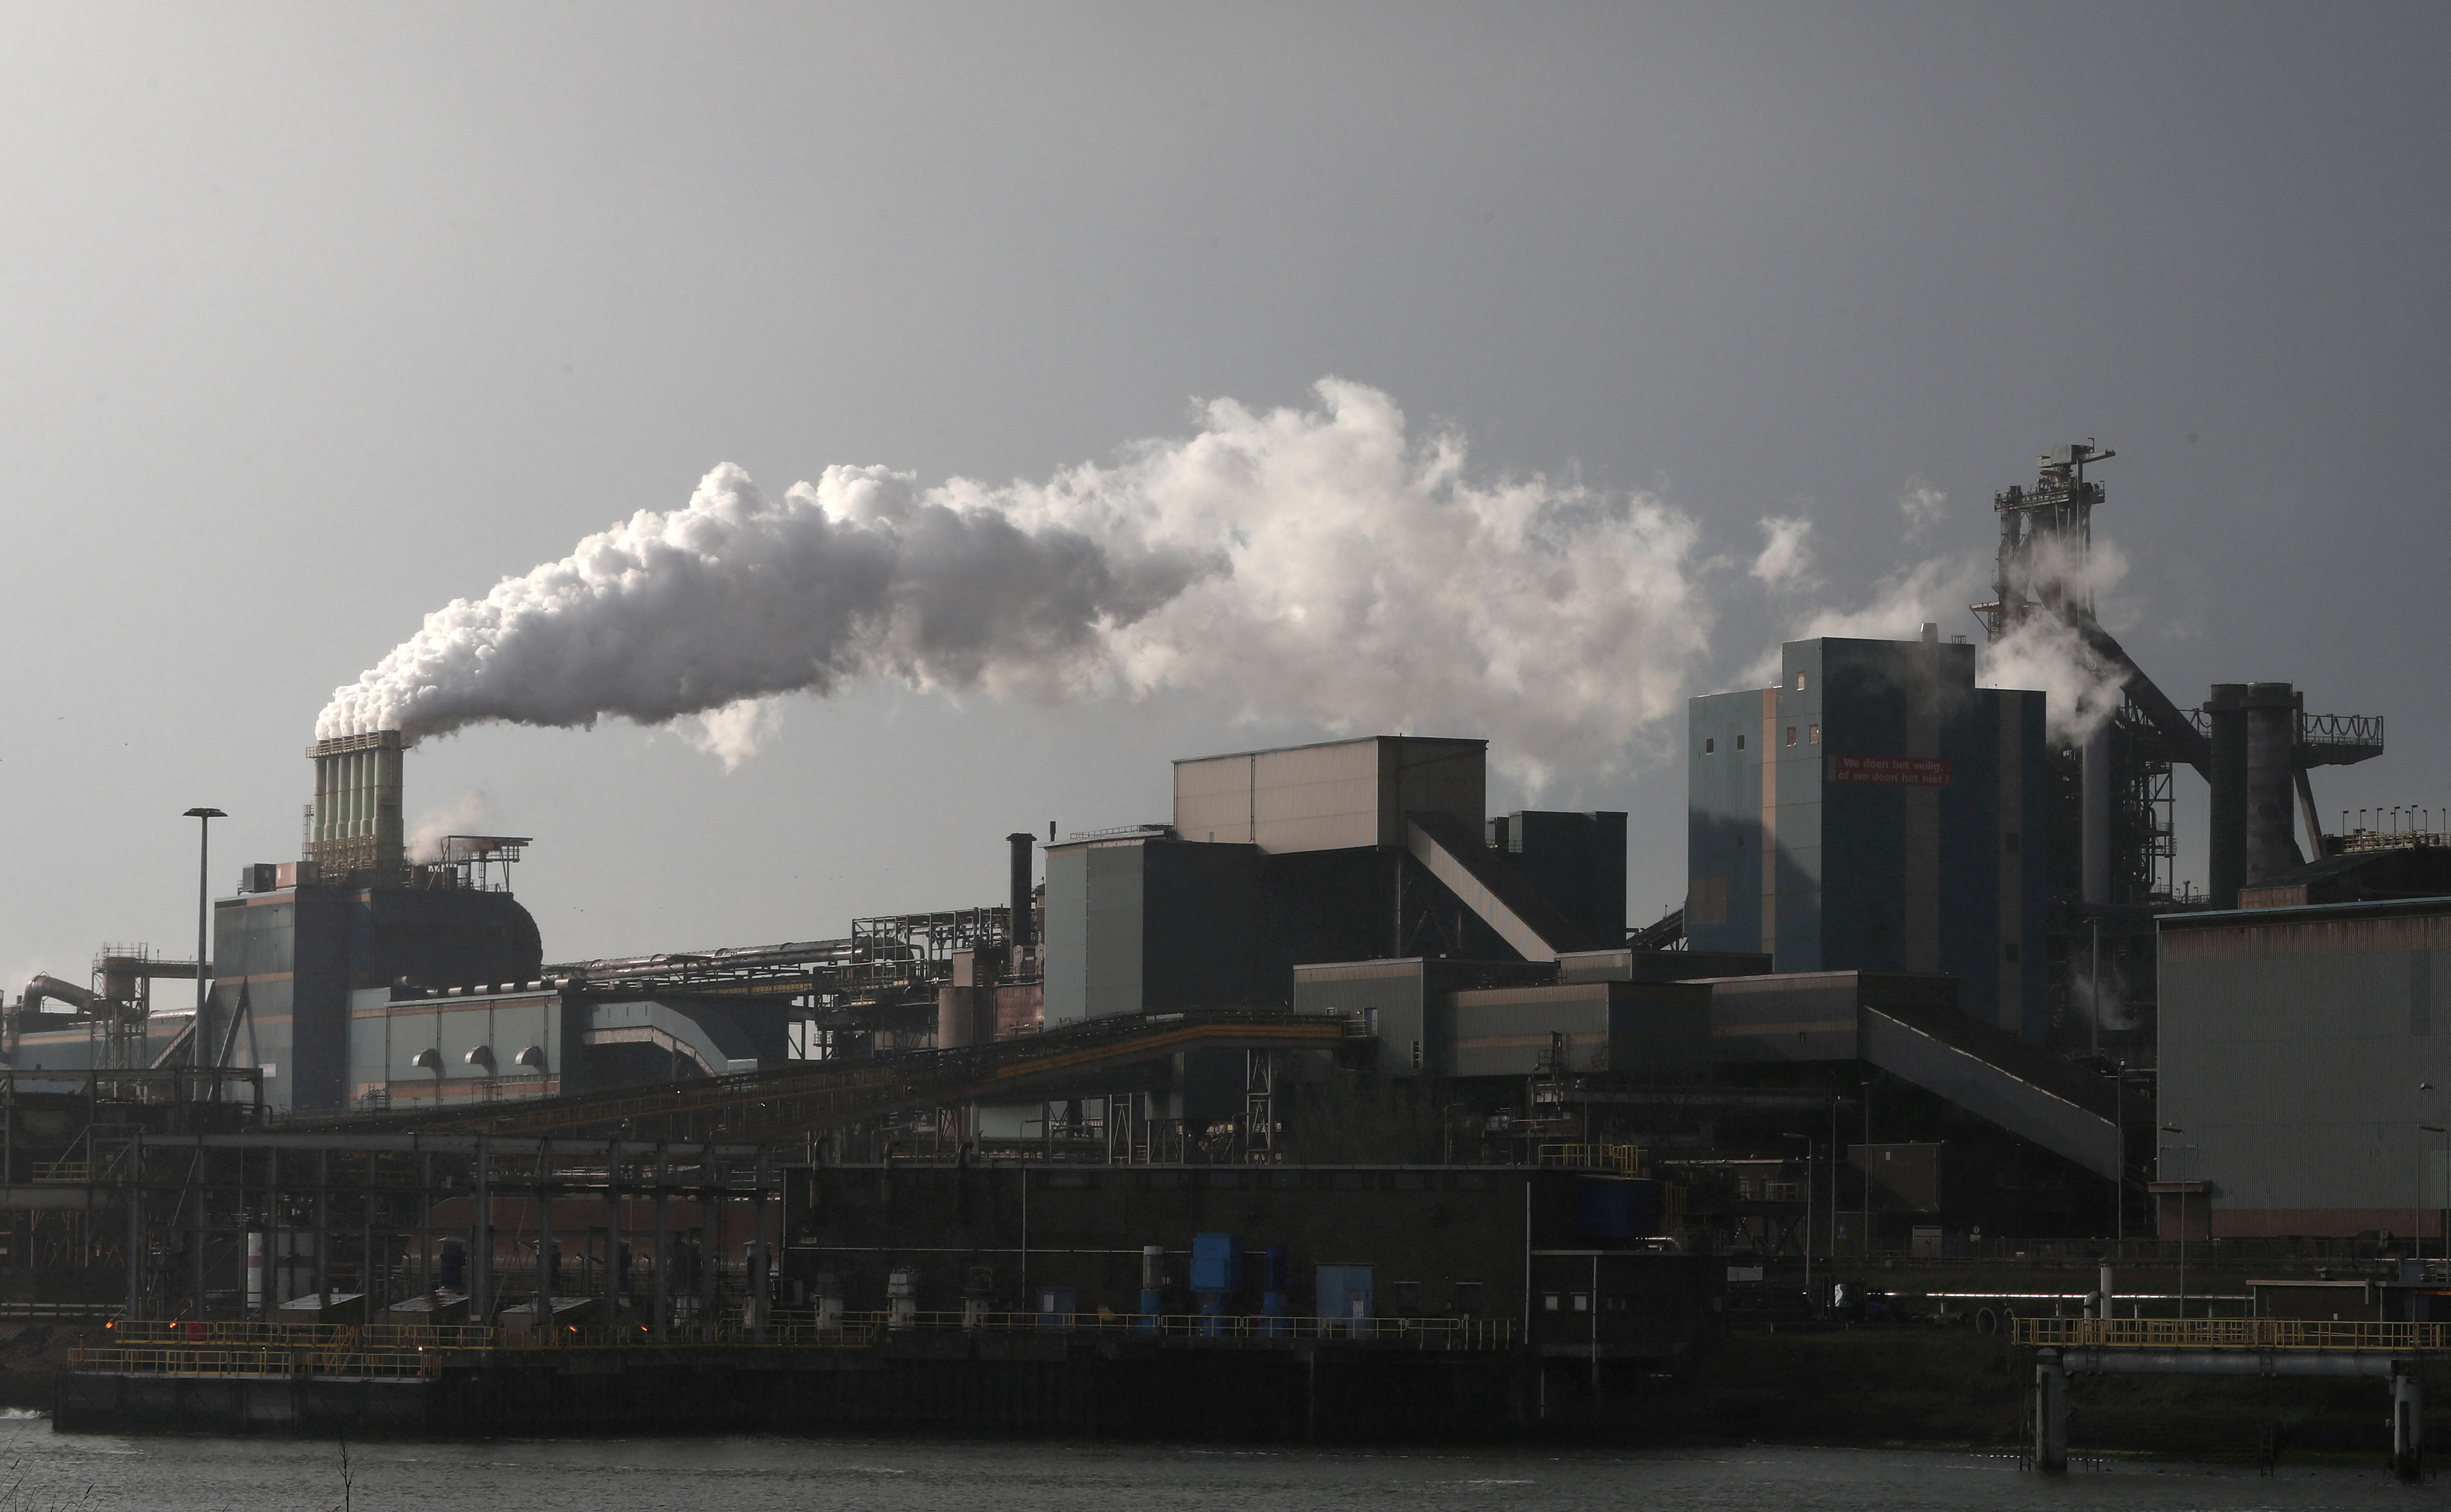 People living around Tata Steel exposed to many harmful substances: RIVM